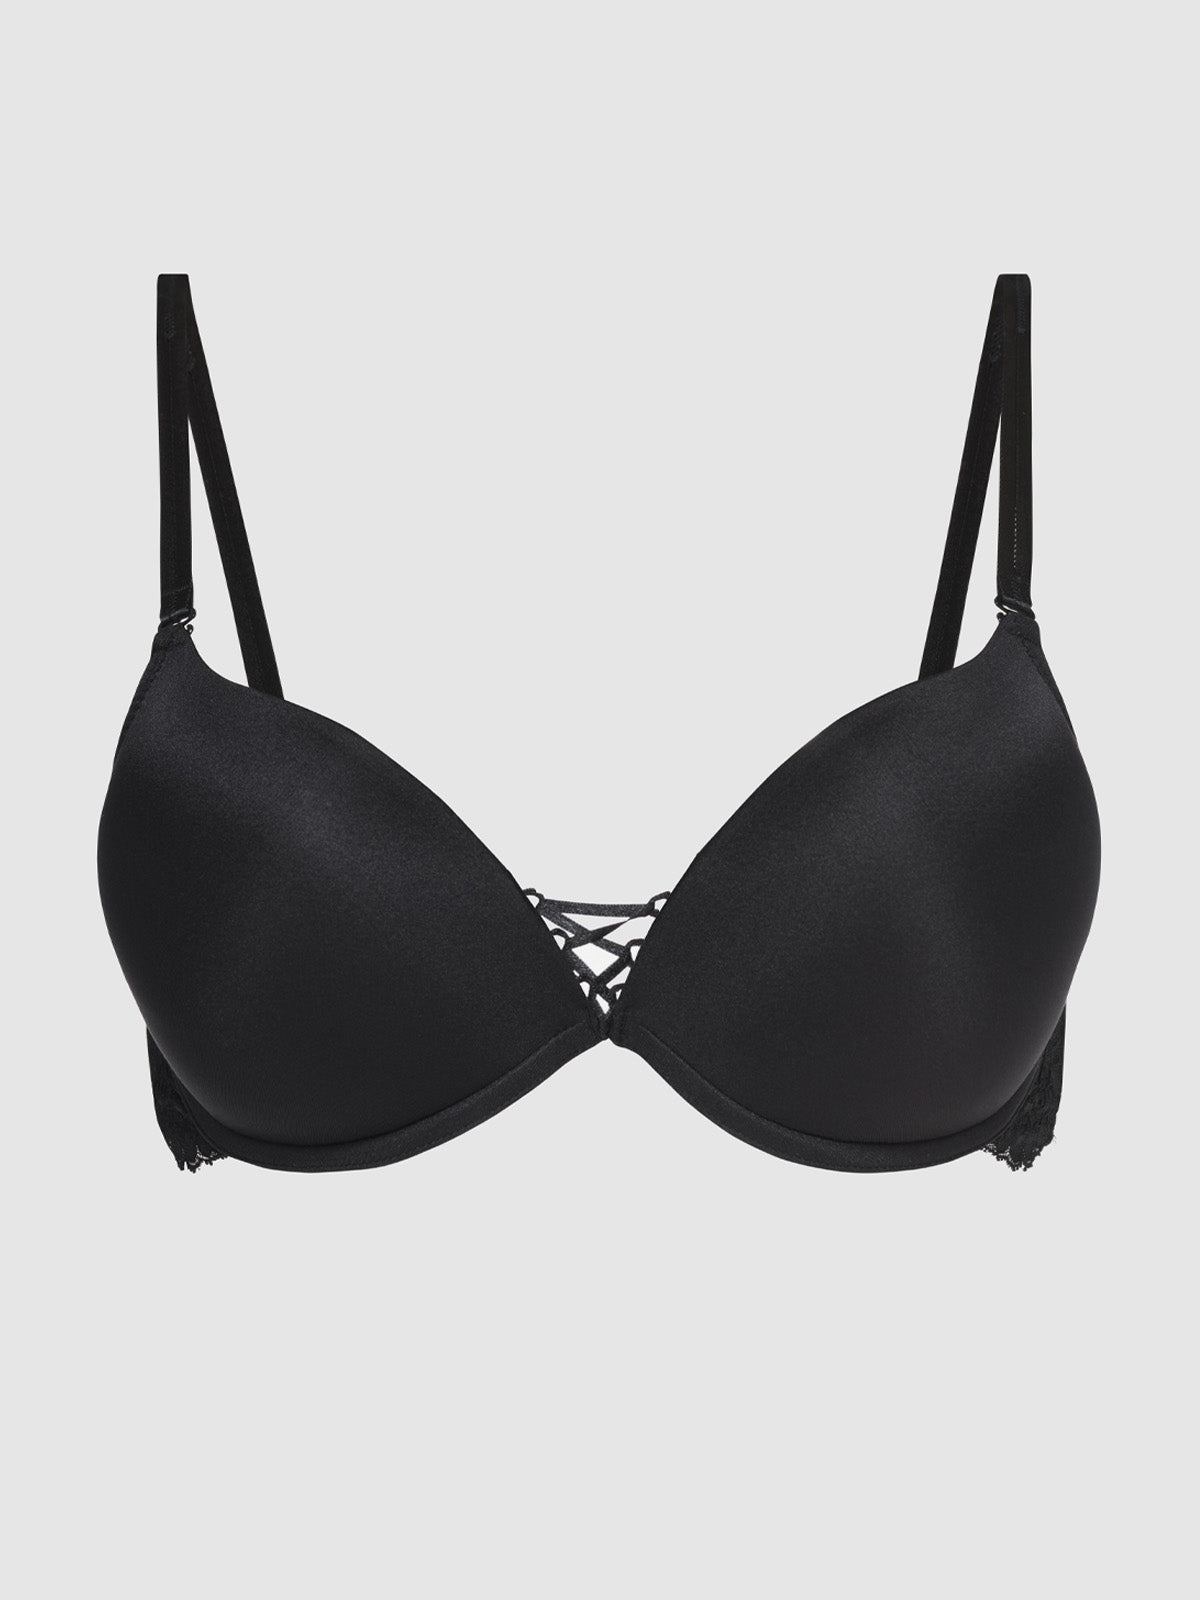 *SOLD* Frederick's of Hollywood gel cup bra